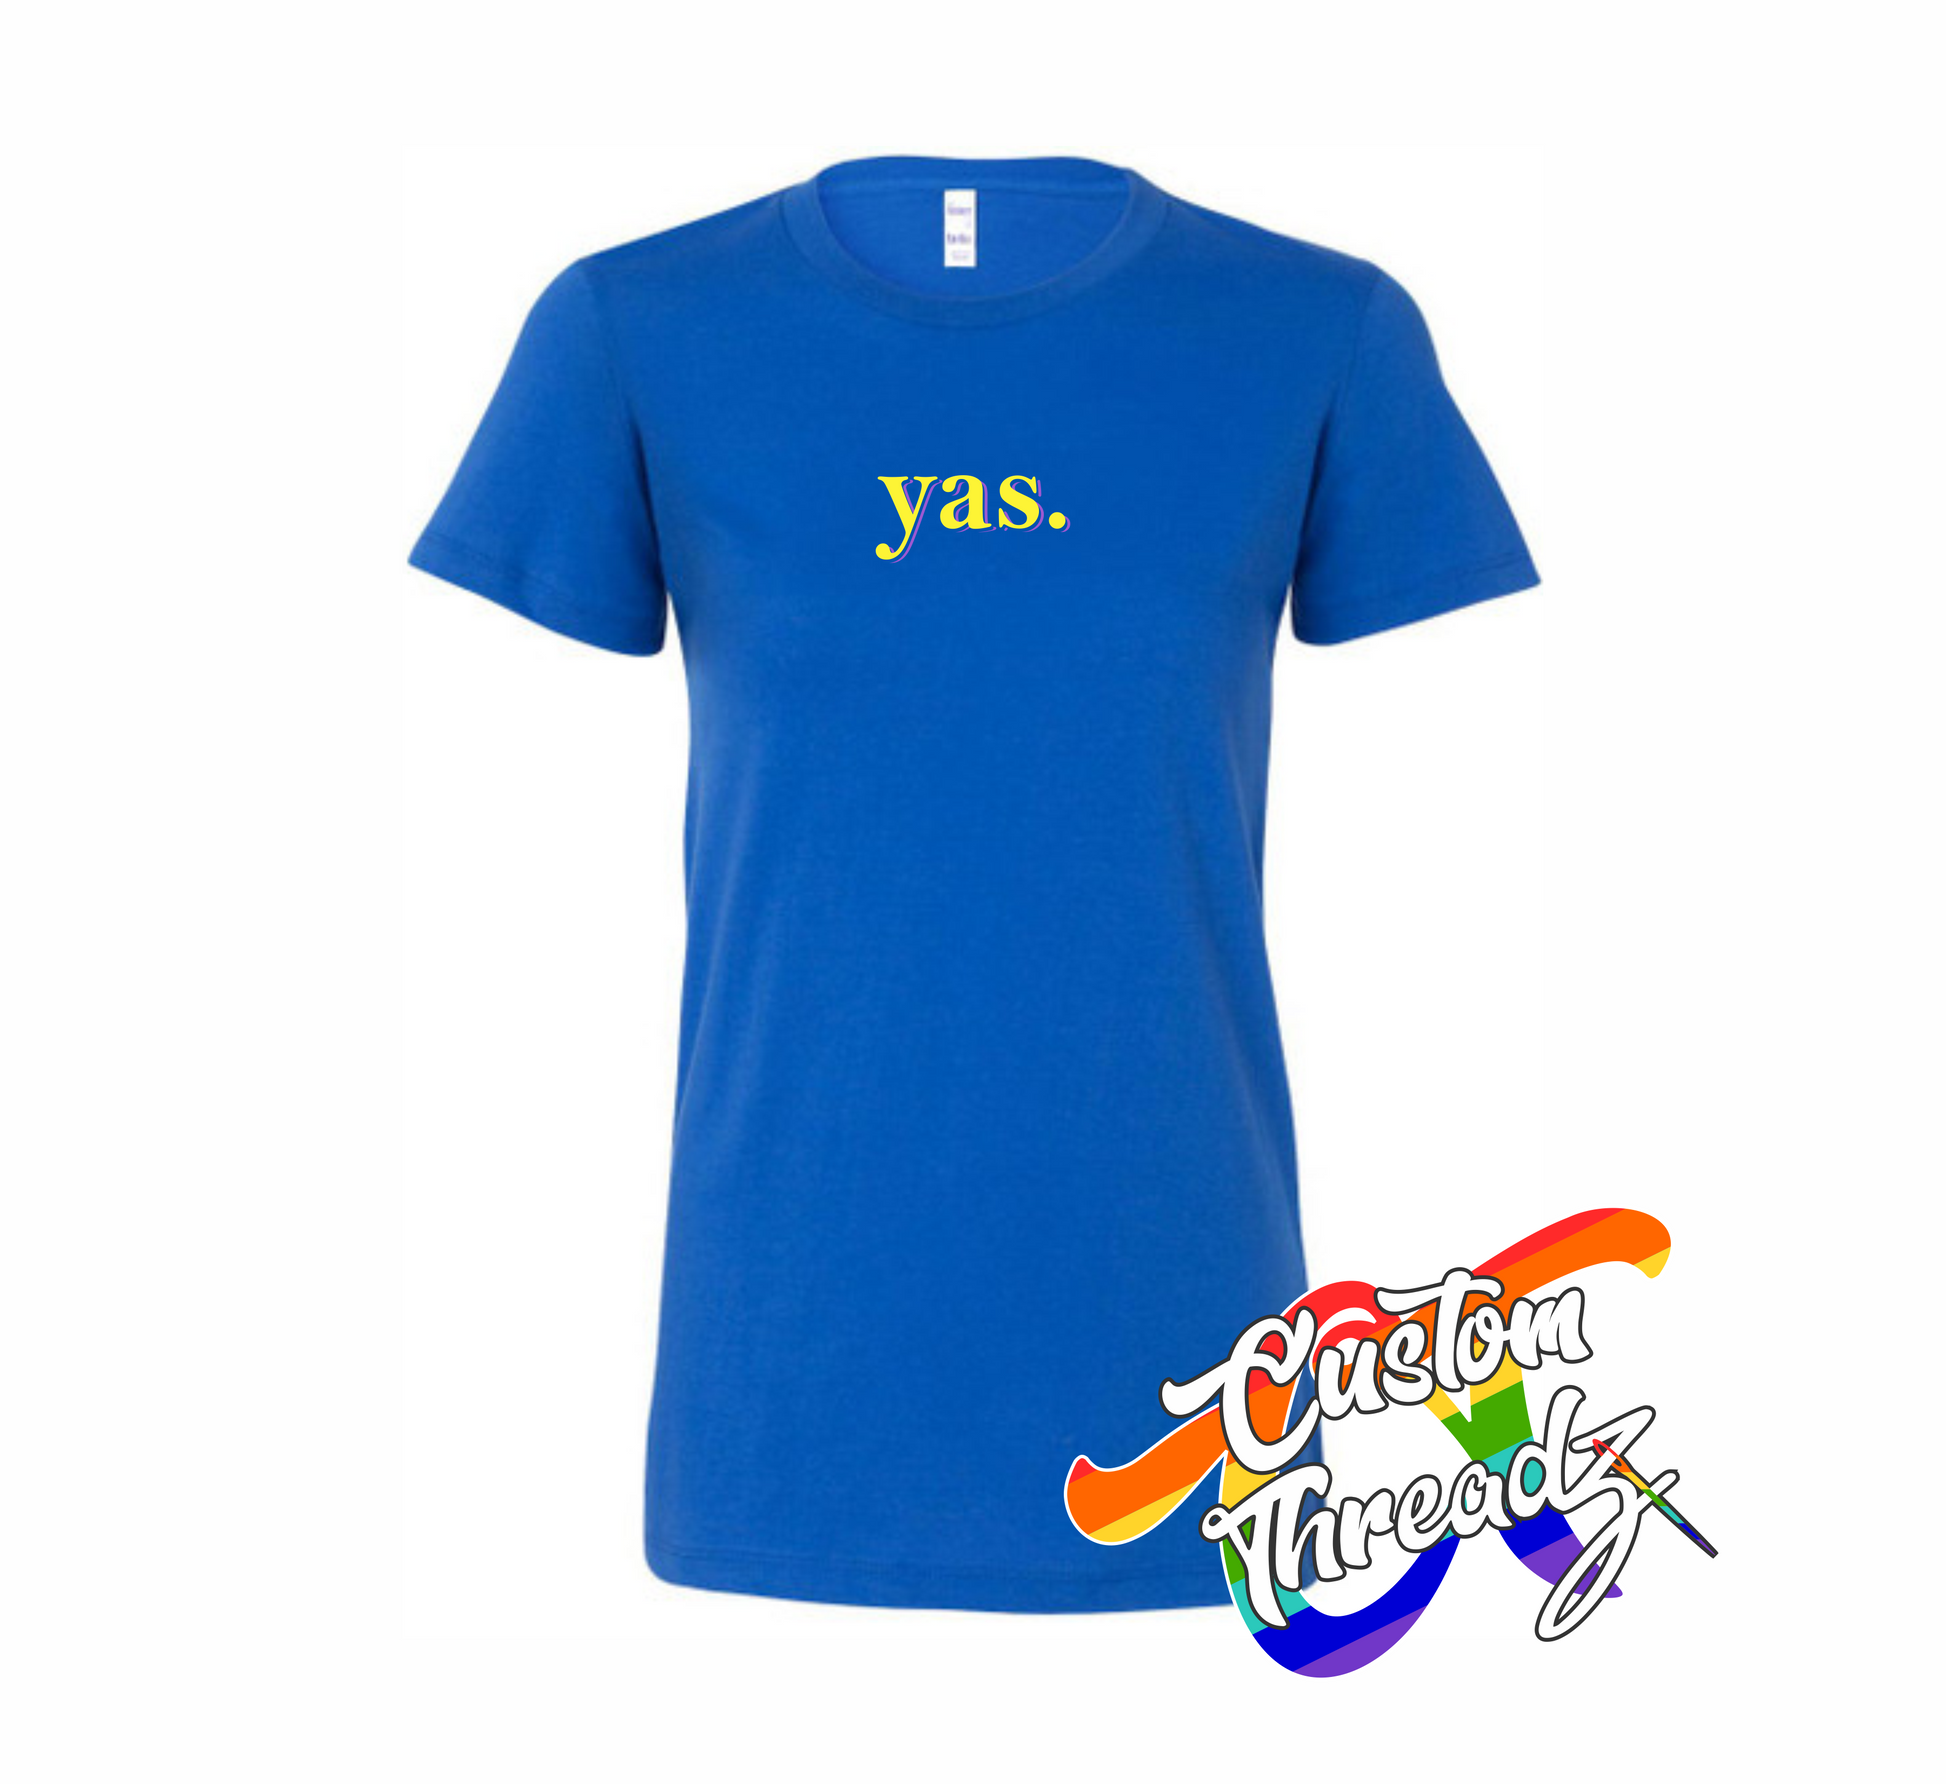 royal blue womens tee with yas DTG printed design